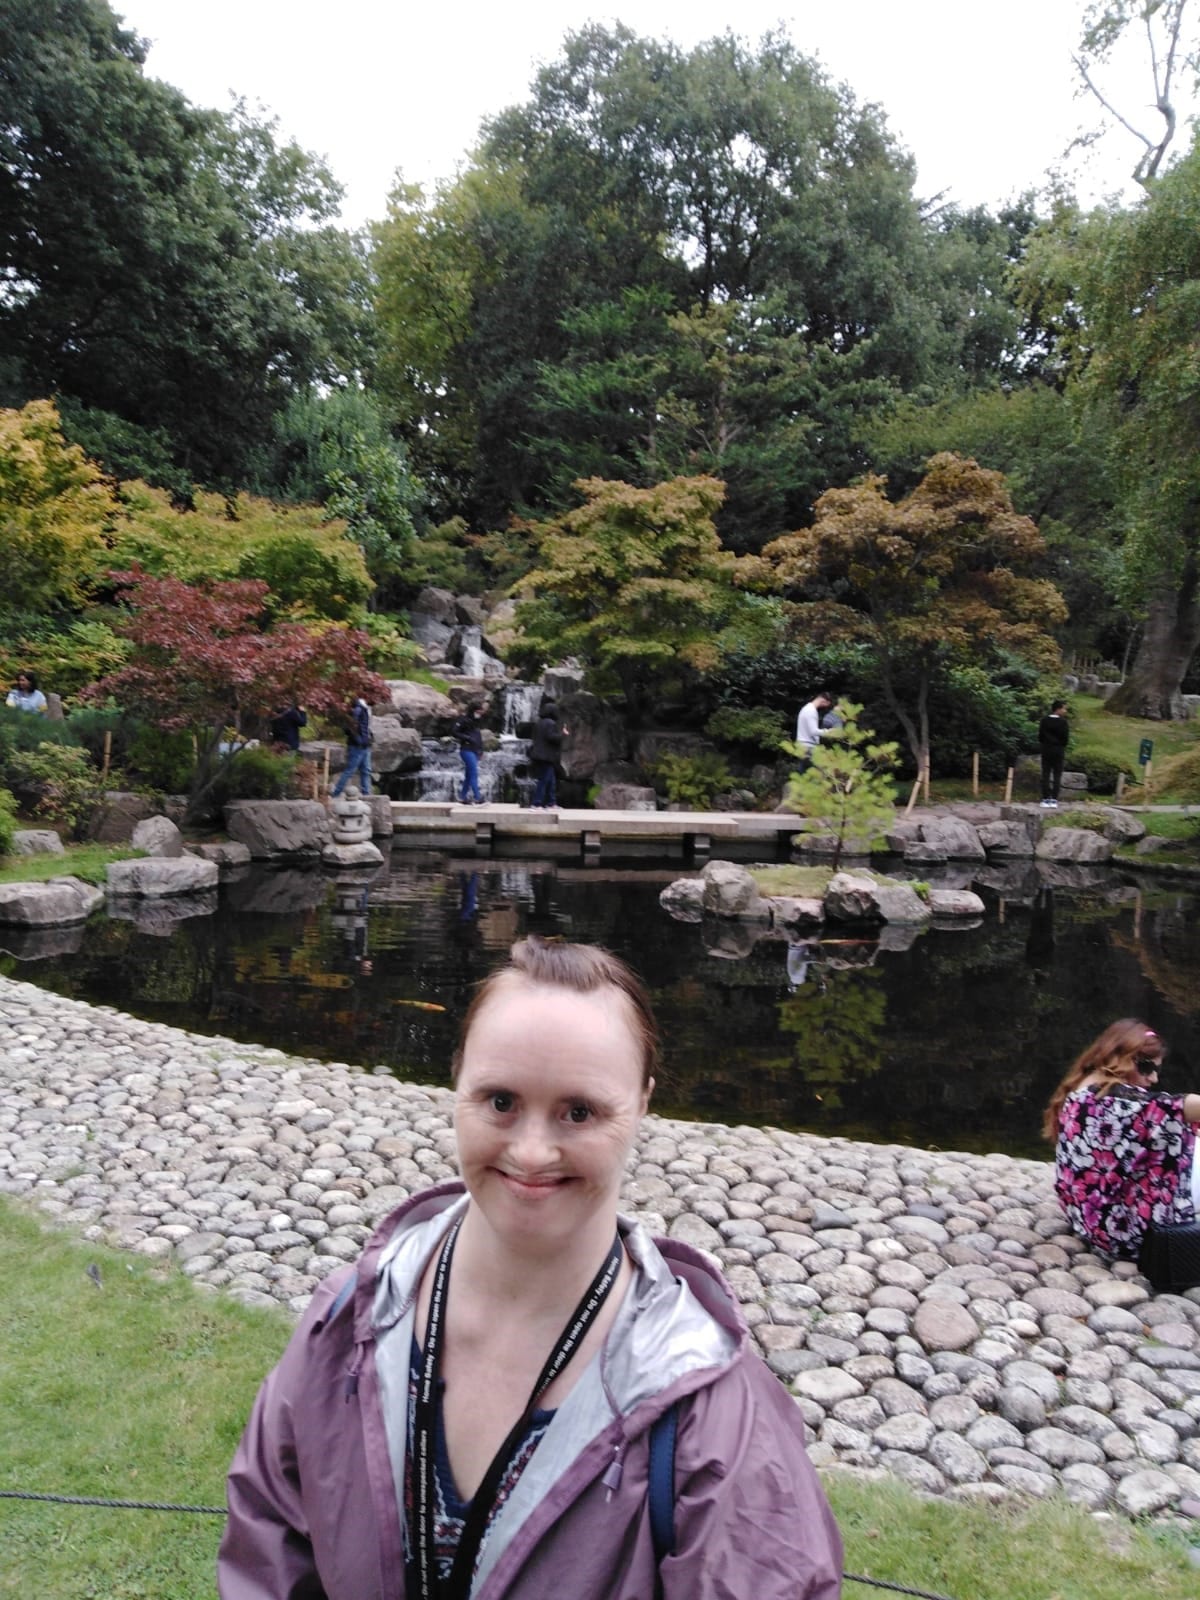 A woman who has Down's syndrome stands in front of a decorative garden pond